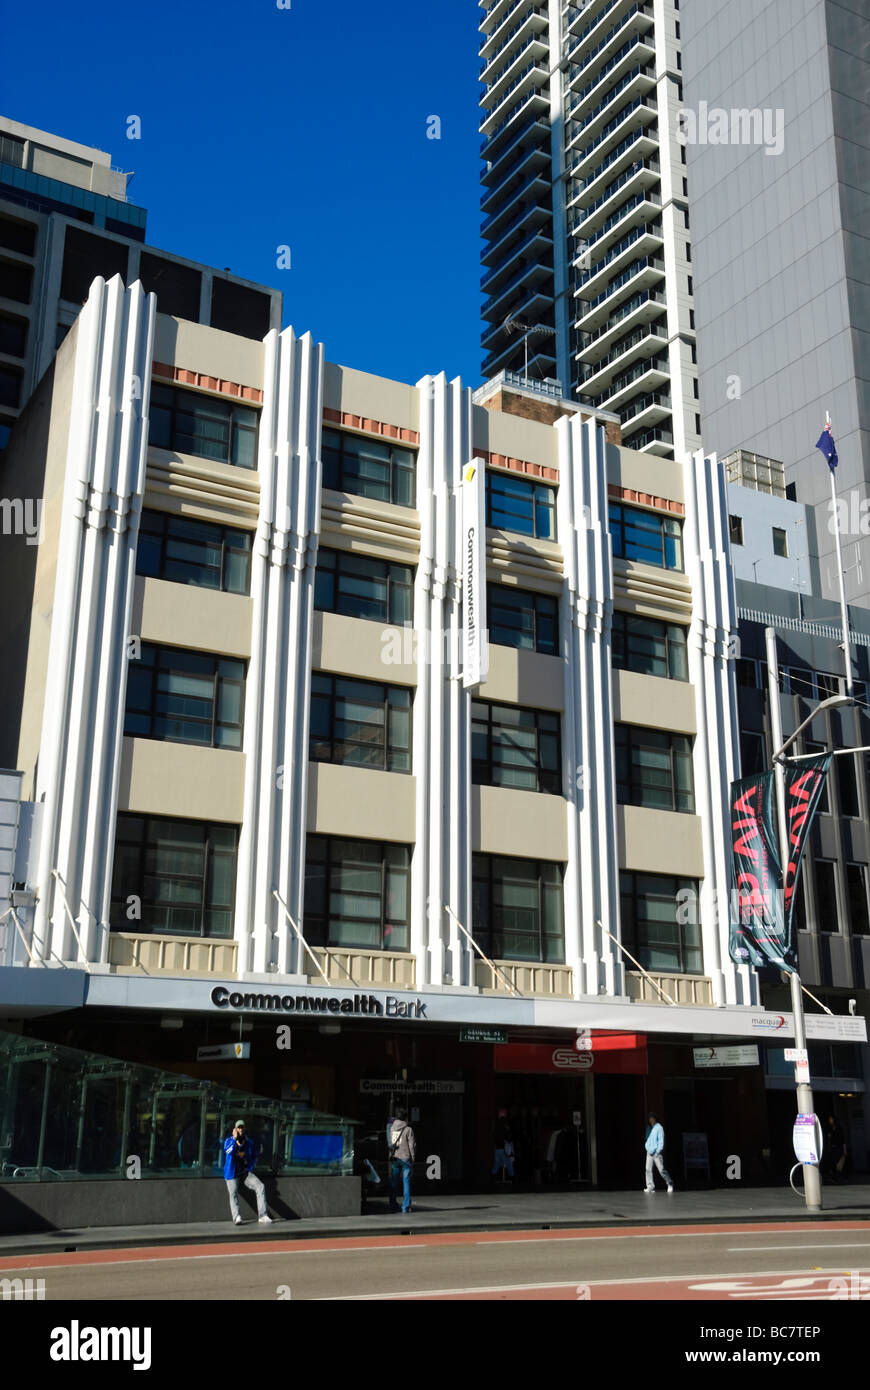 Well renovated art deco building in the centre of Sydney - a branch of the Commonwealth Bank of Australia. Painted building; art deco architecture Stock Photo